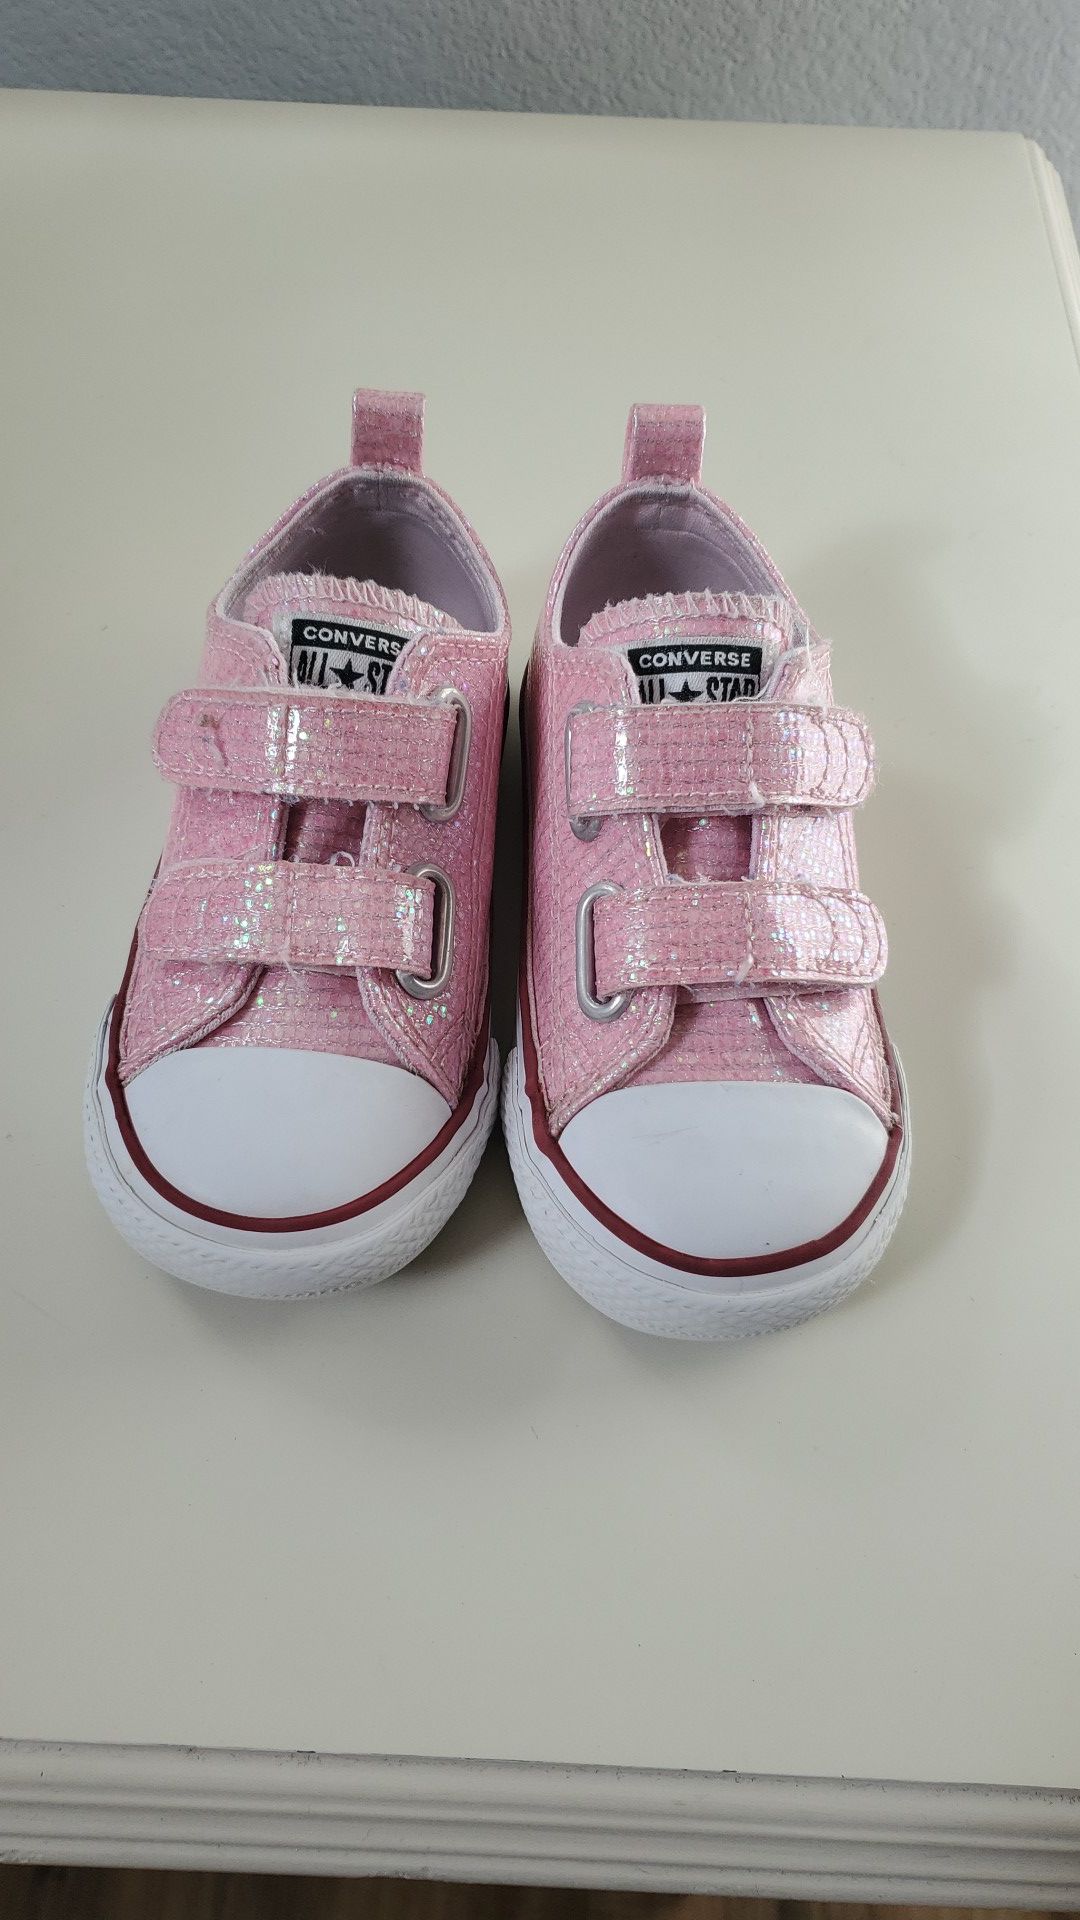 Toddler Girl Converse Glitter shoes size 7C( pink and silver) for Carol